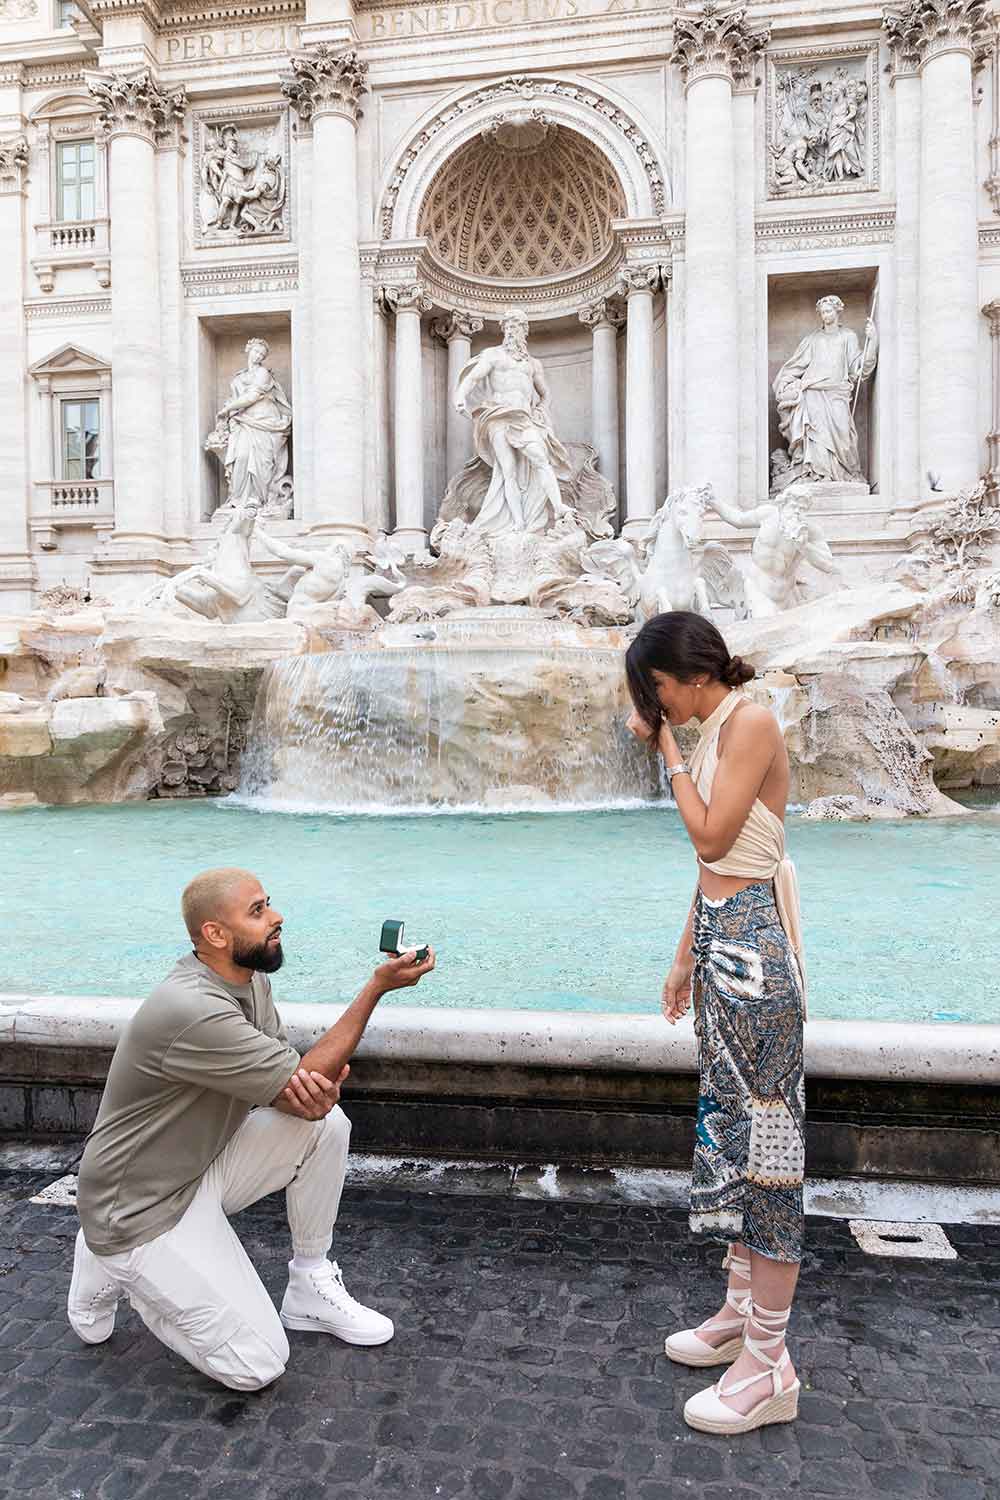 Knee down surprise wedding proposal photographed at the Trevi fountain in the early morning to avoid crowds. Turning out to be a really romantic Trevi proposal